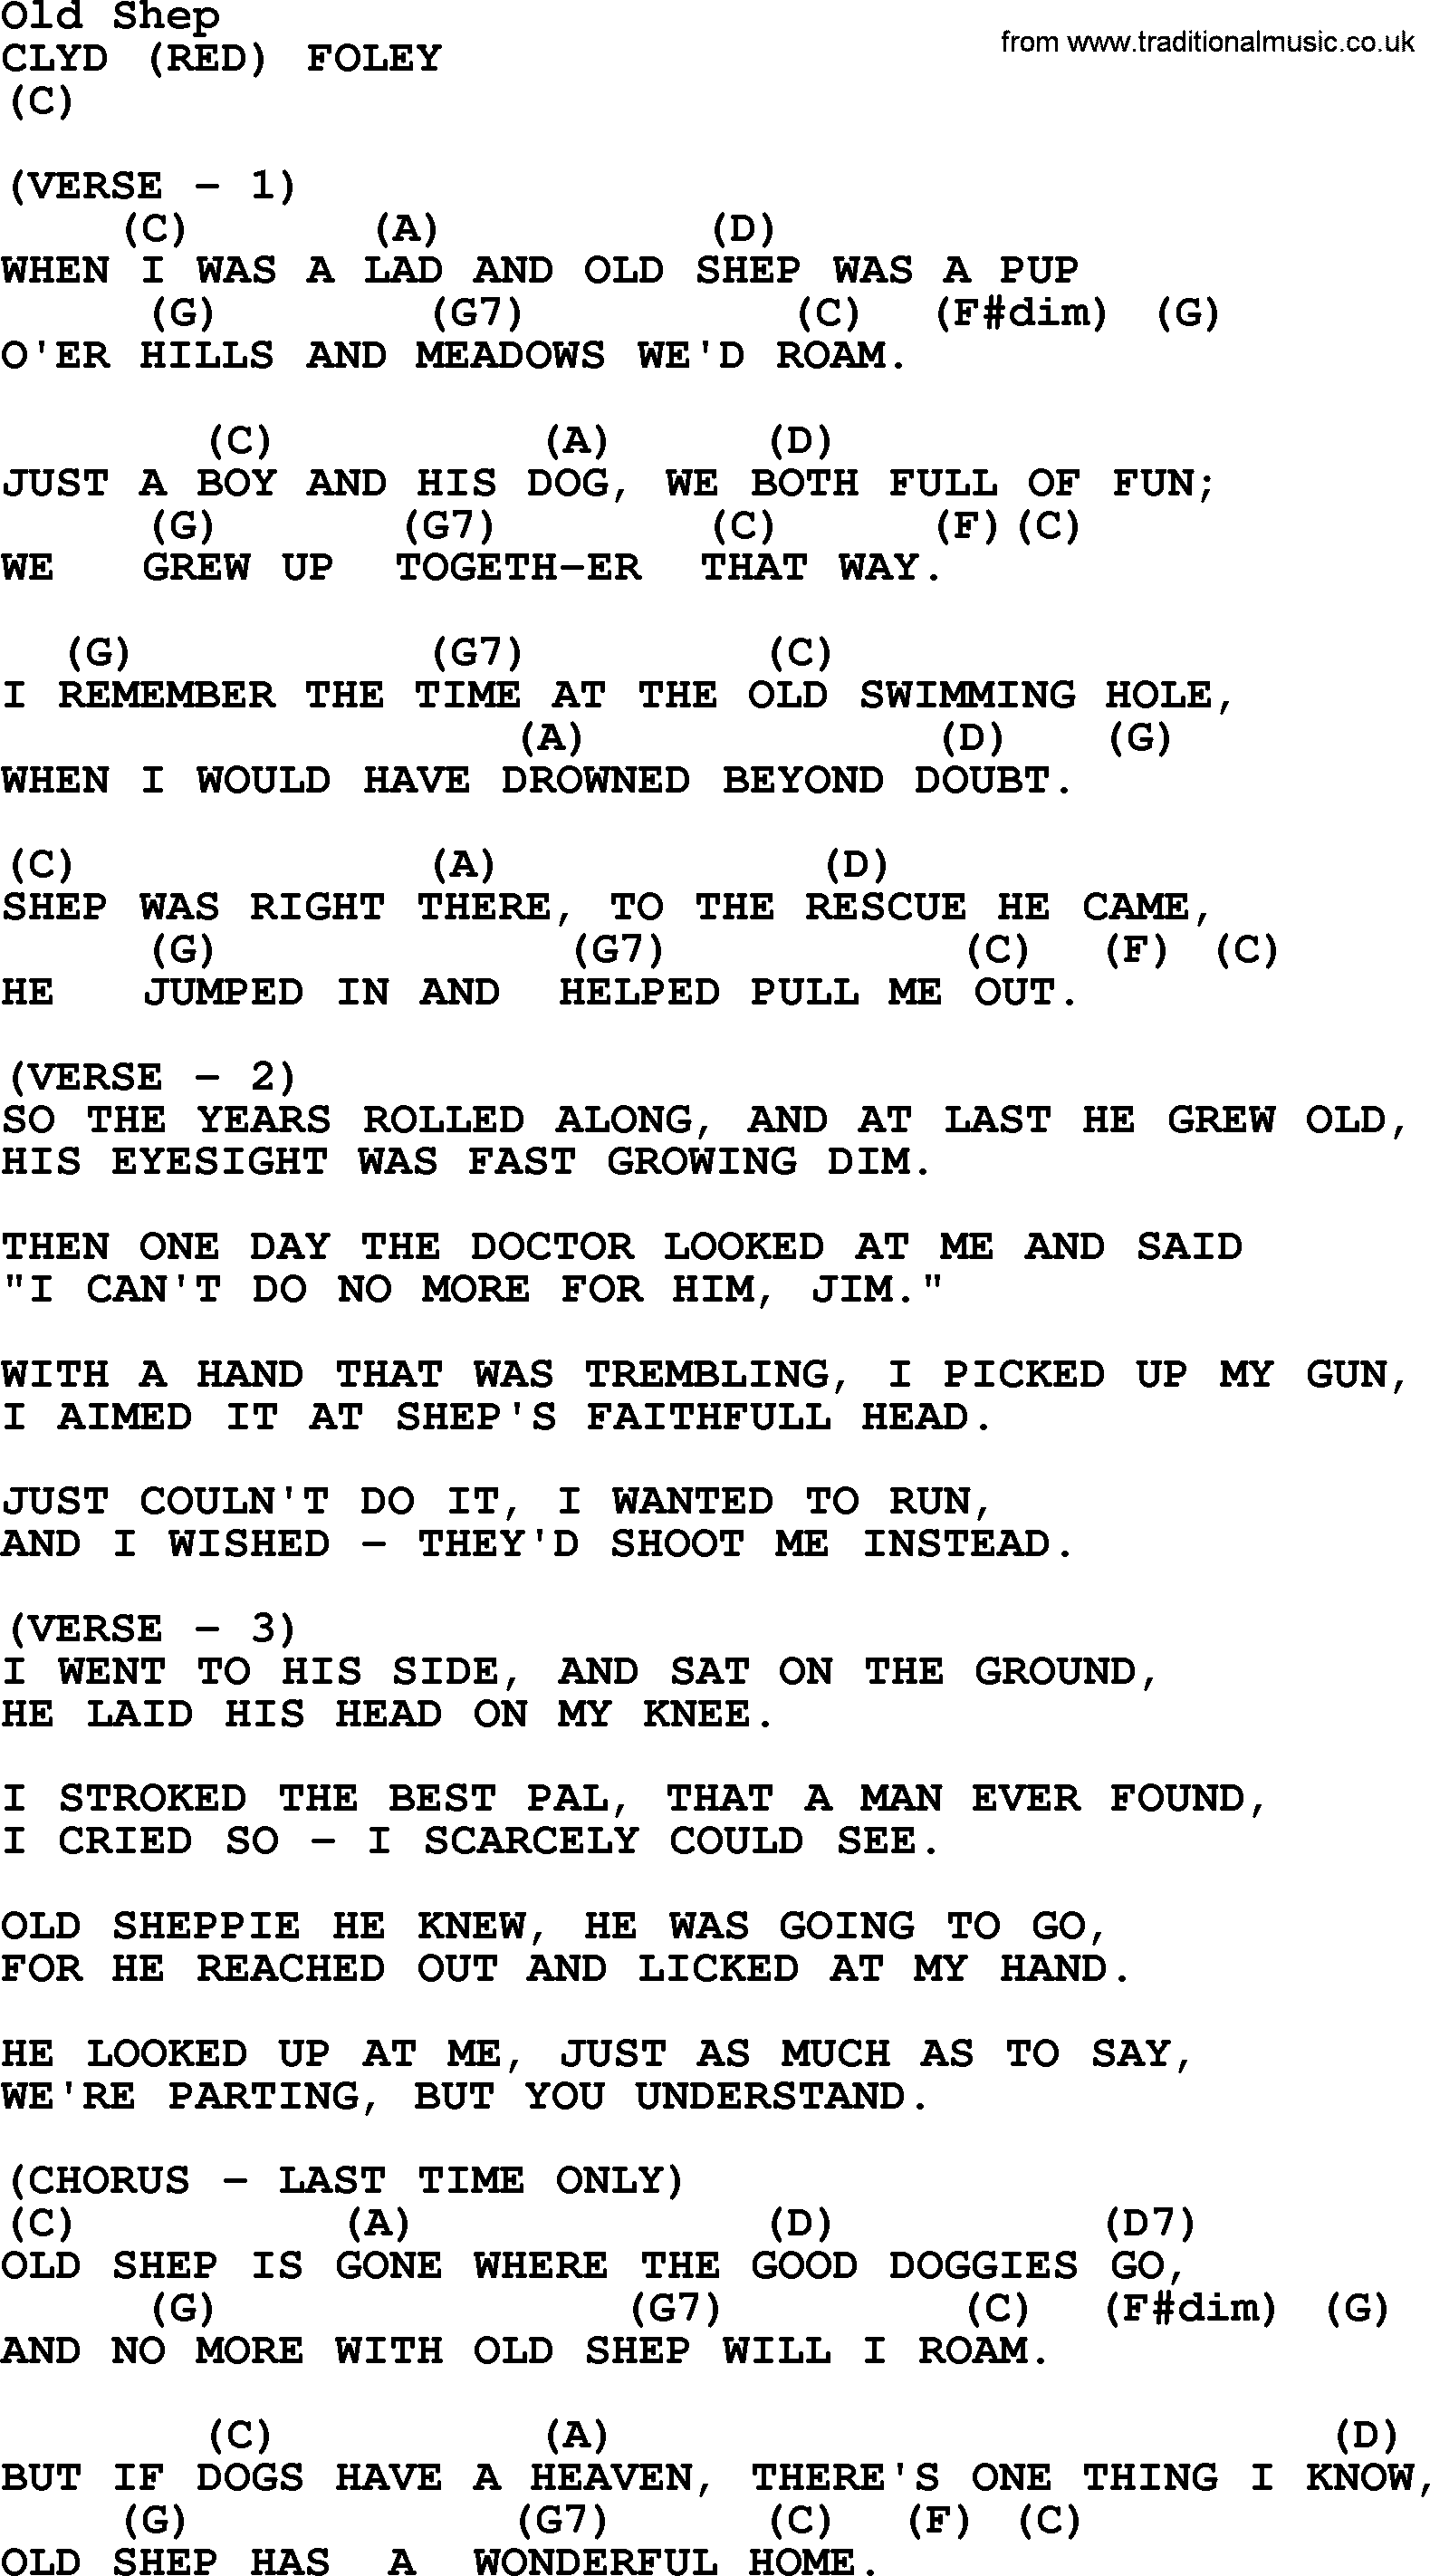 Bluegrass song: Old Shep, lyrics and chords